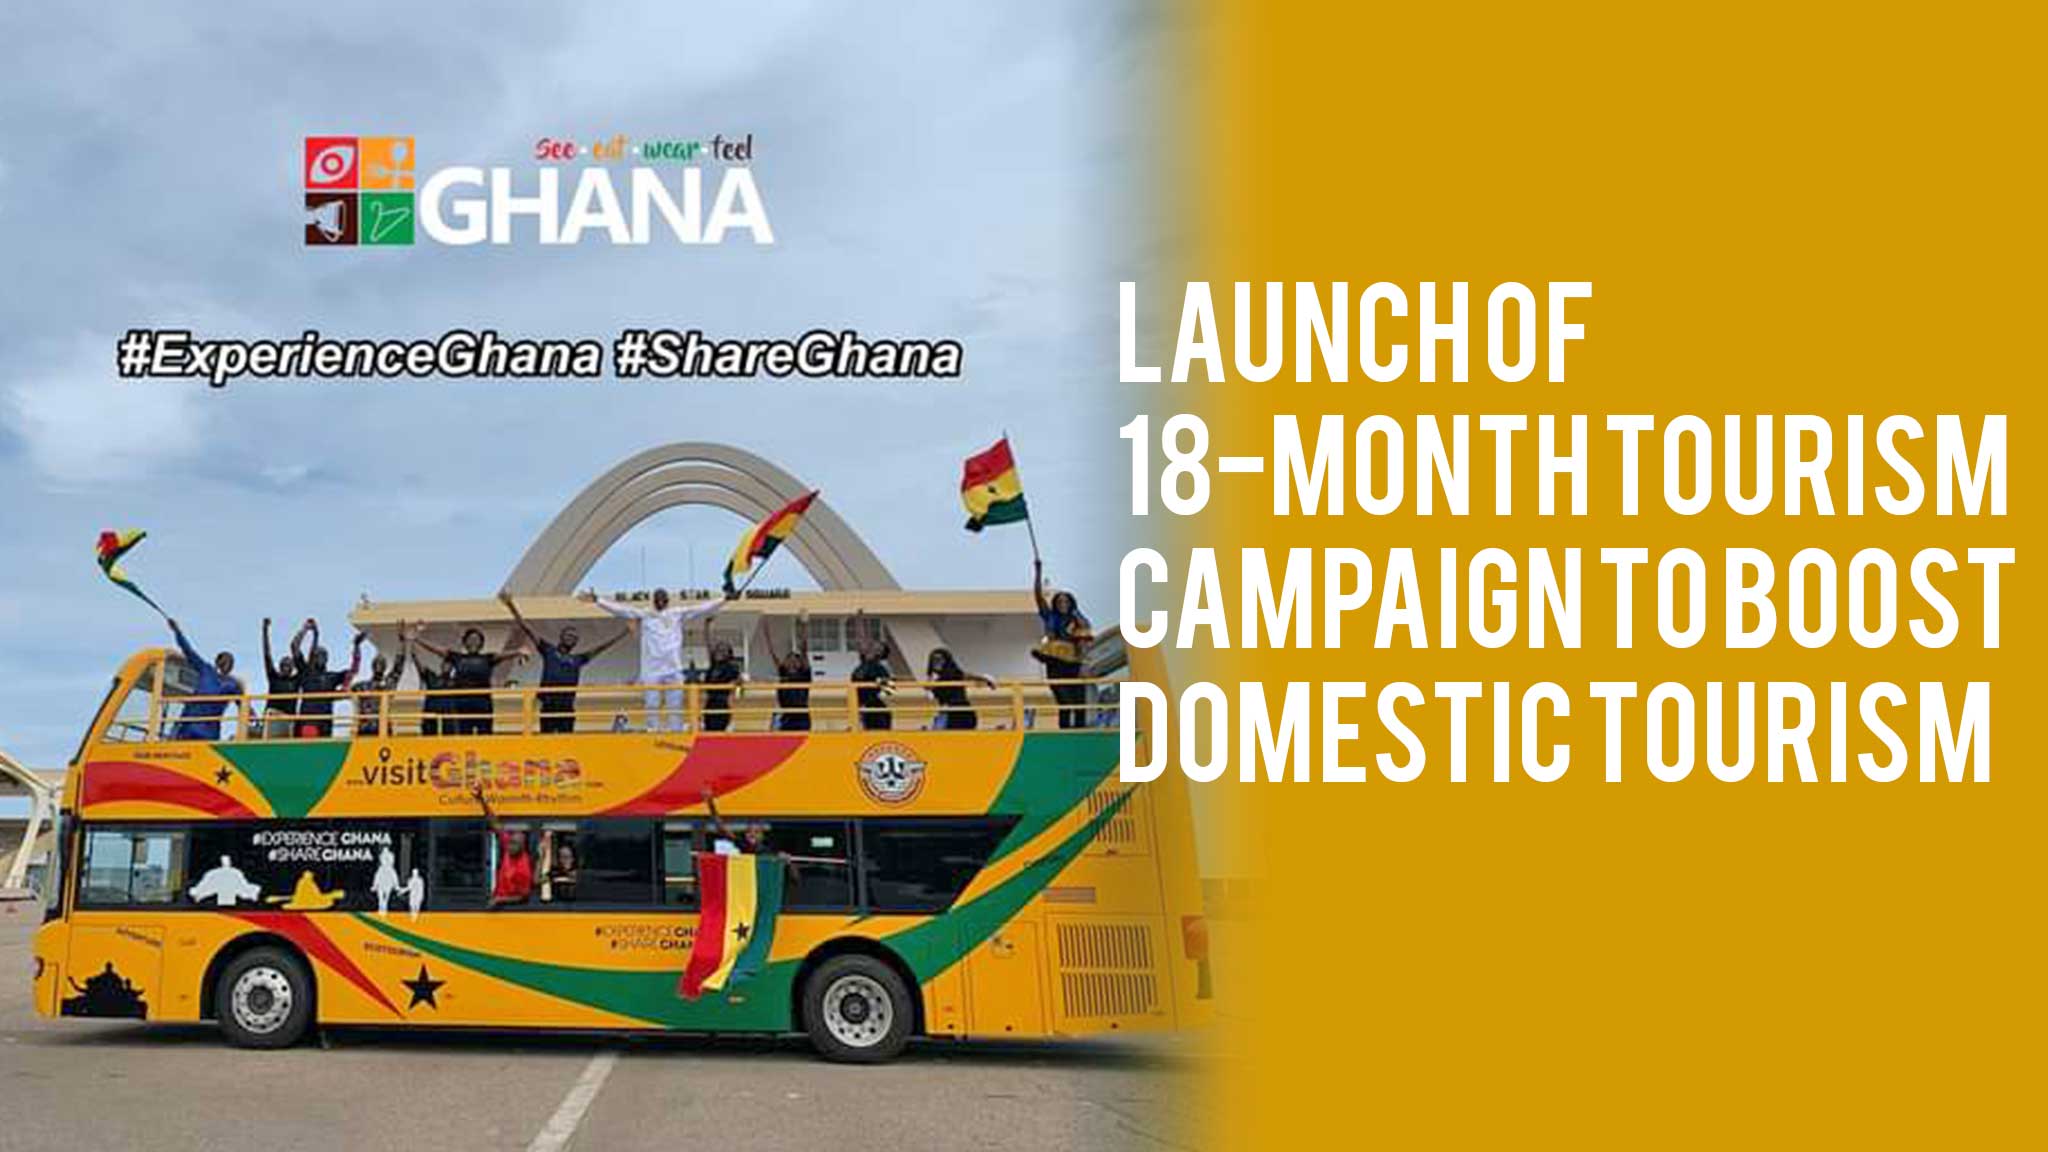 travel and tourism news in ghana